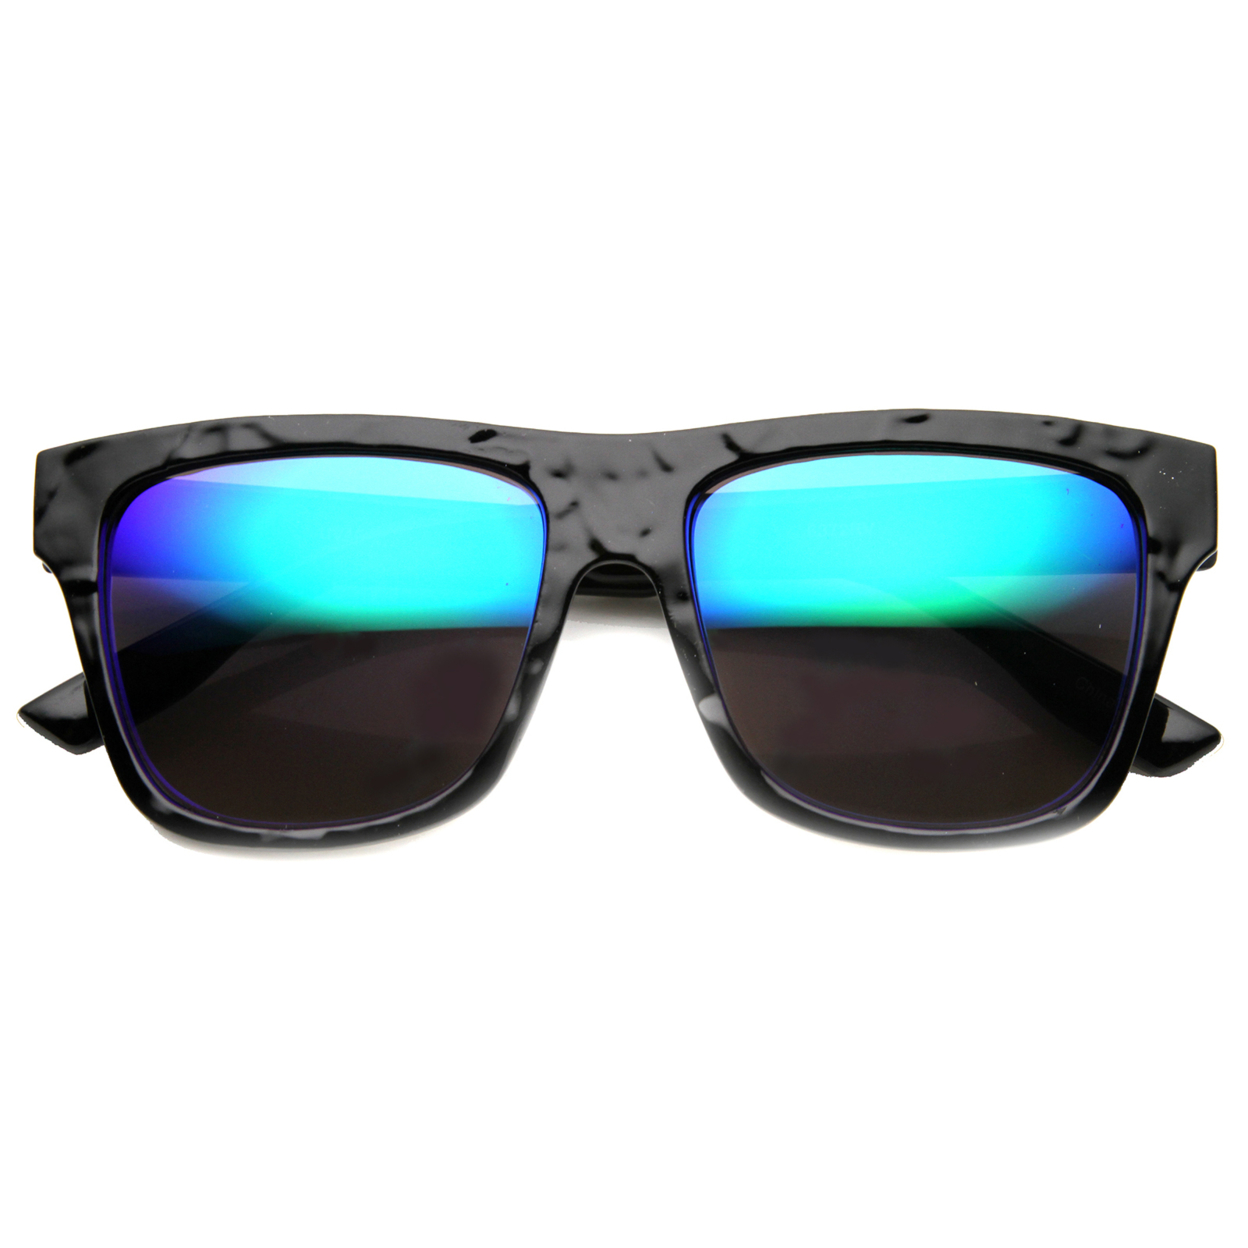 Unisex Horn Rimmed Sunglasses With UV400 Protected Mirrored Lens 9864 - Matte-Black / Purple